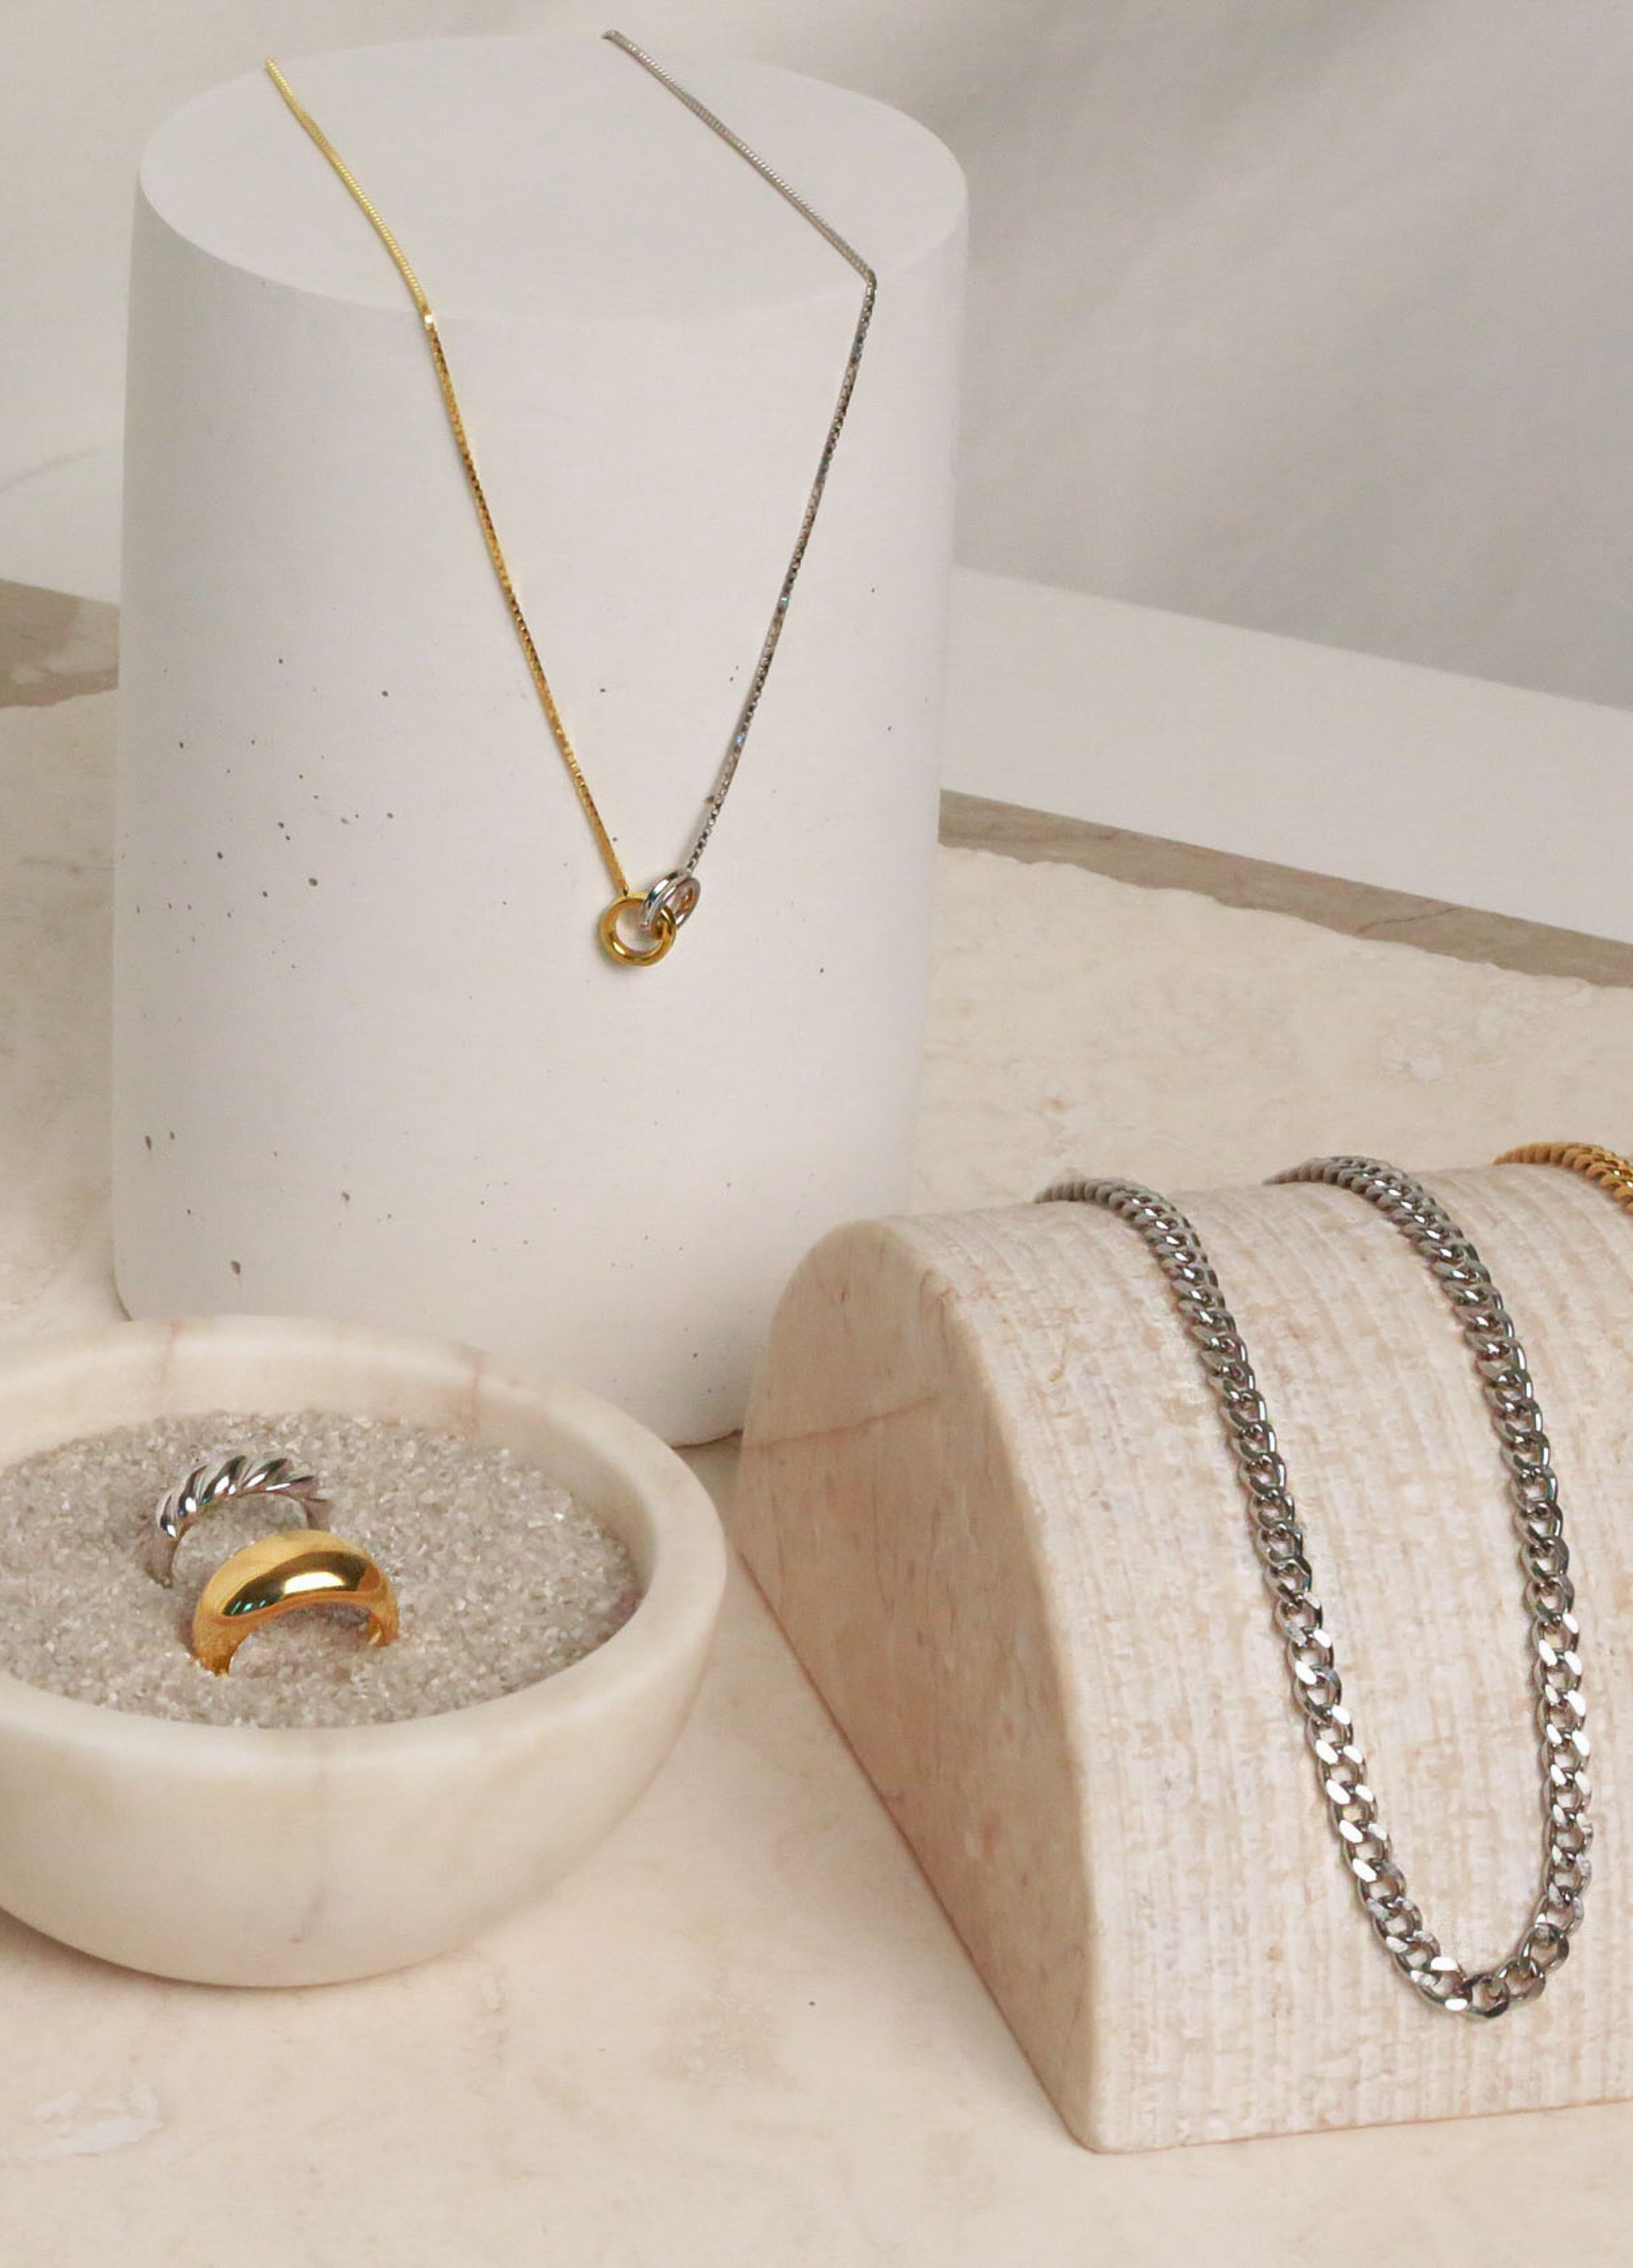 Mixing Metals in your Jewelry Rotation